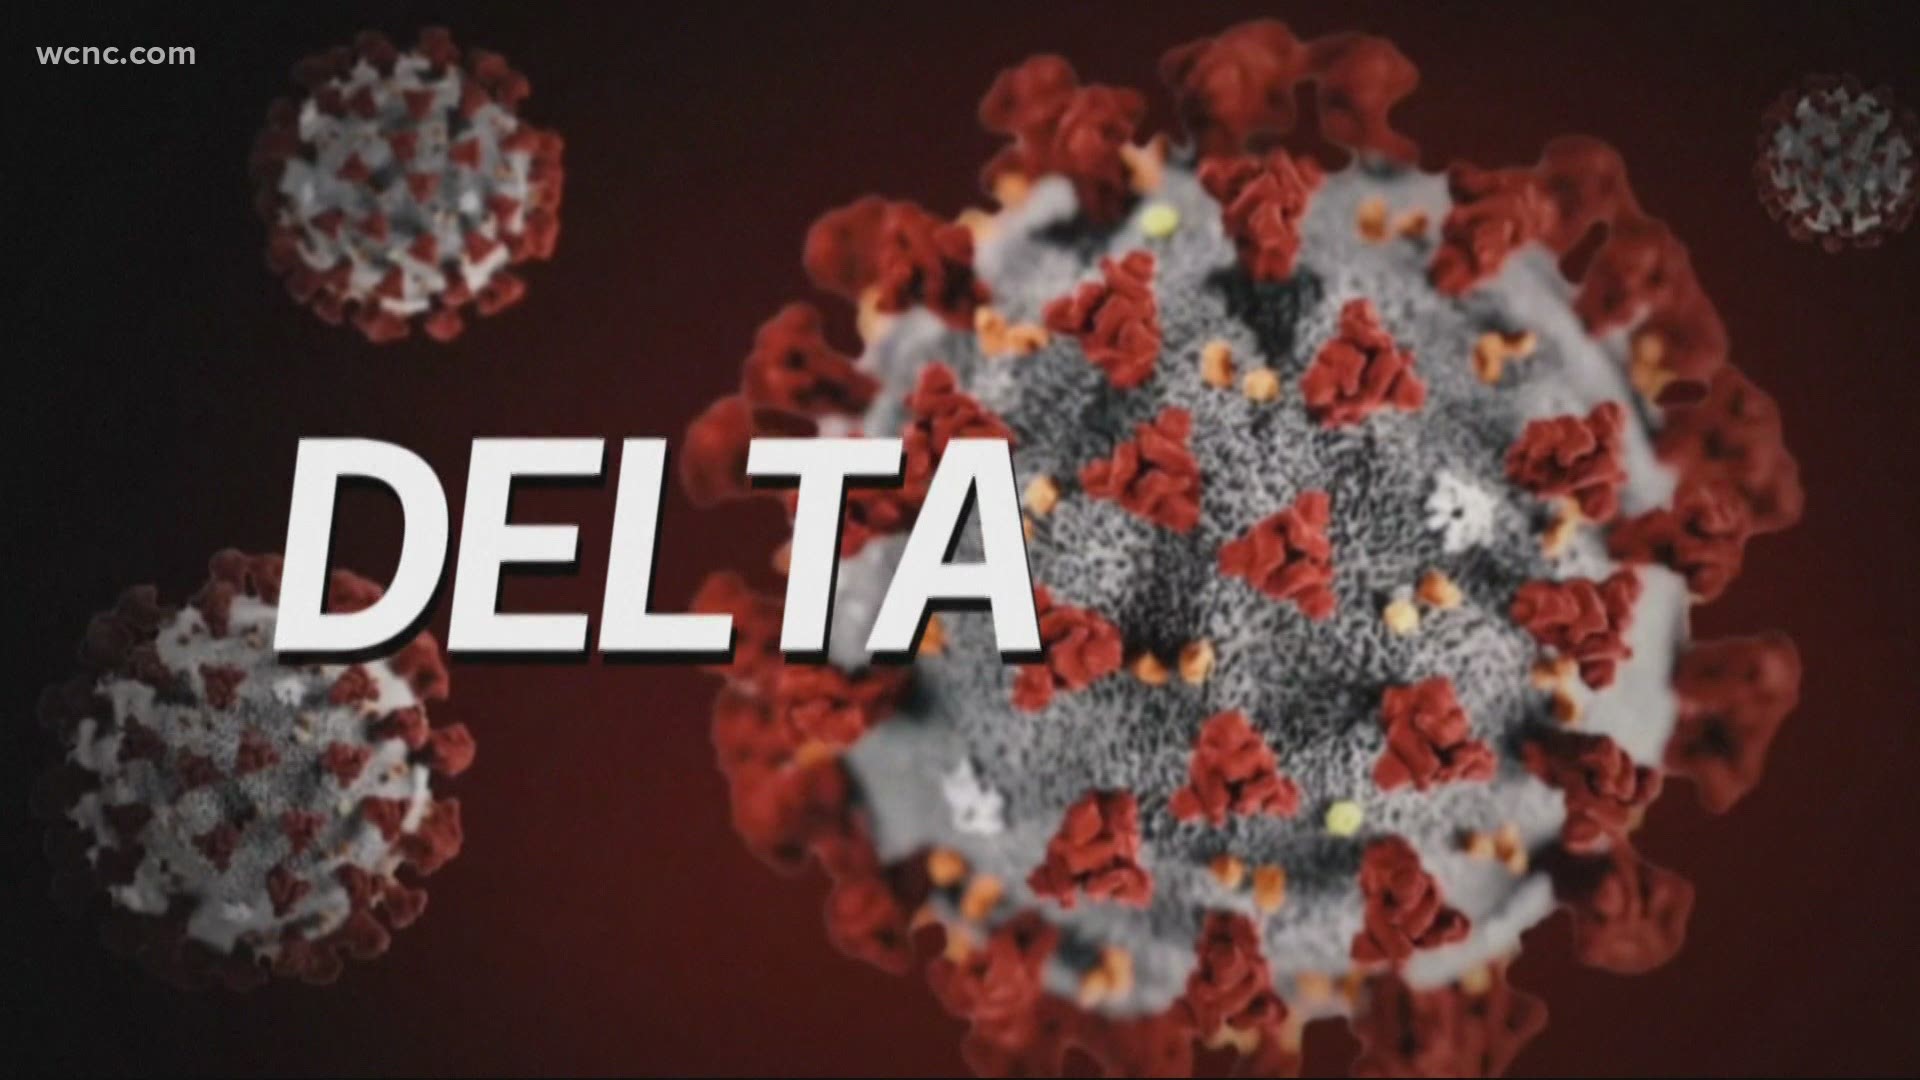 Delta variant is spreading quickly across the country, symptoms more like the common cold